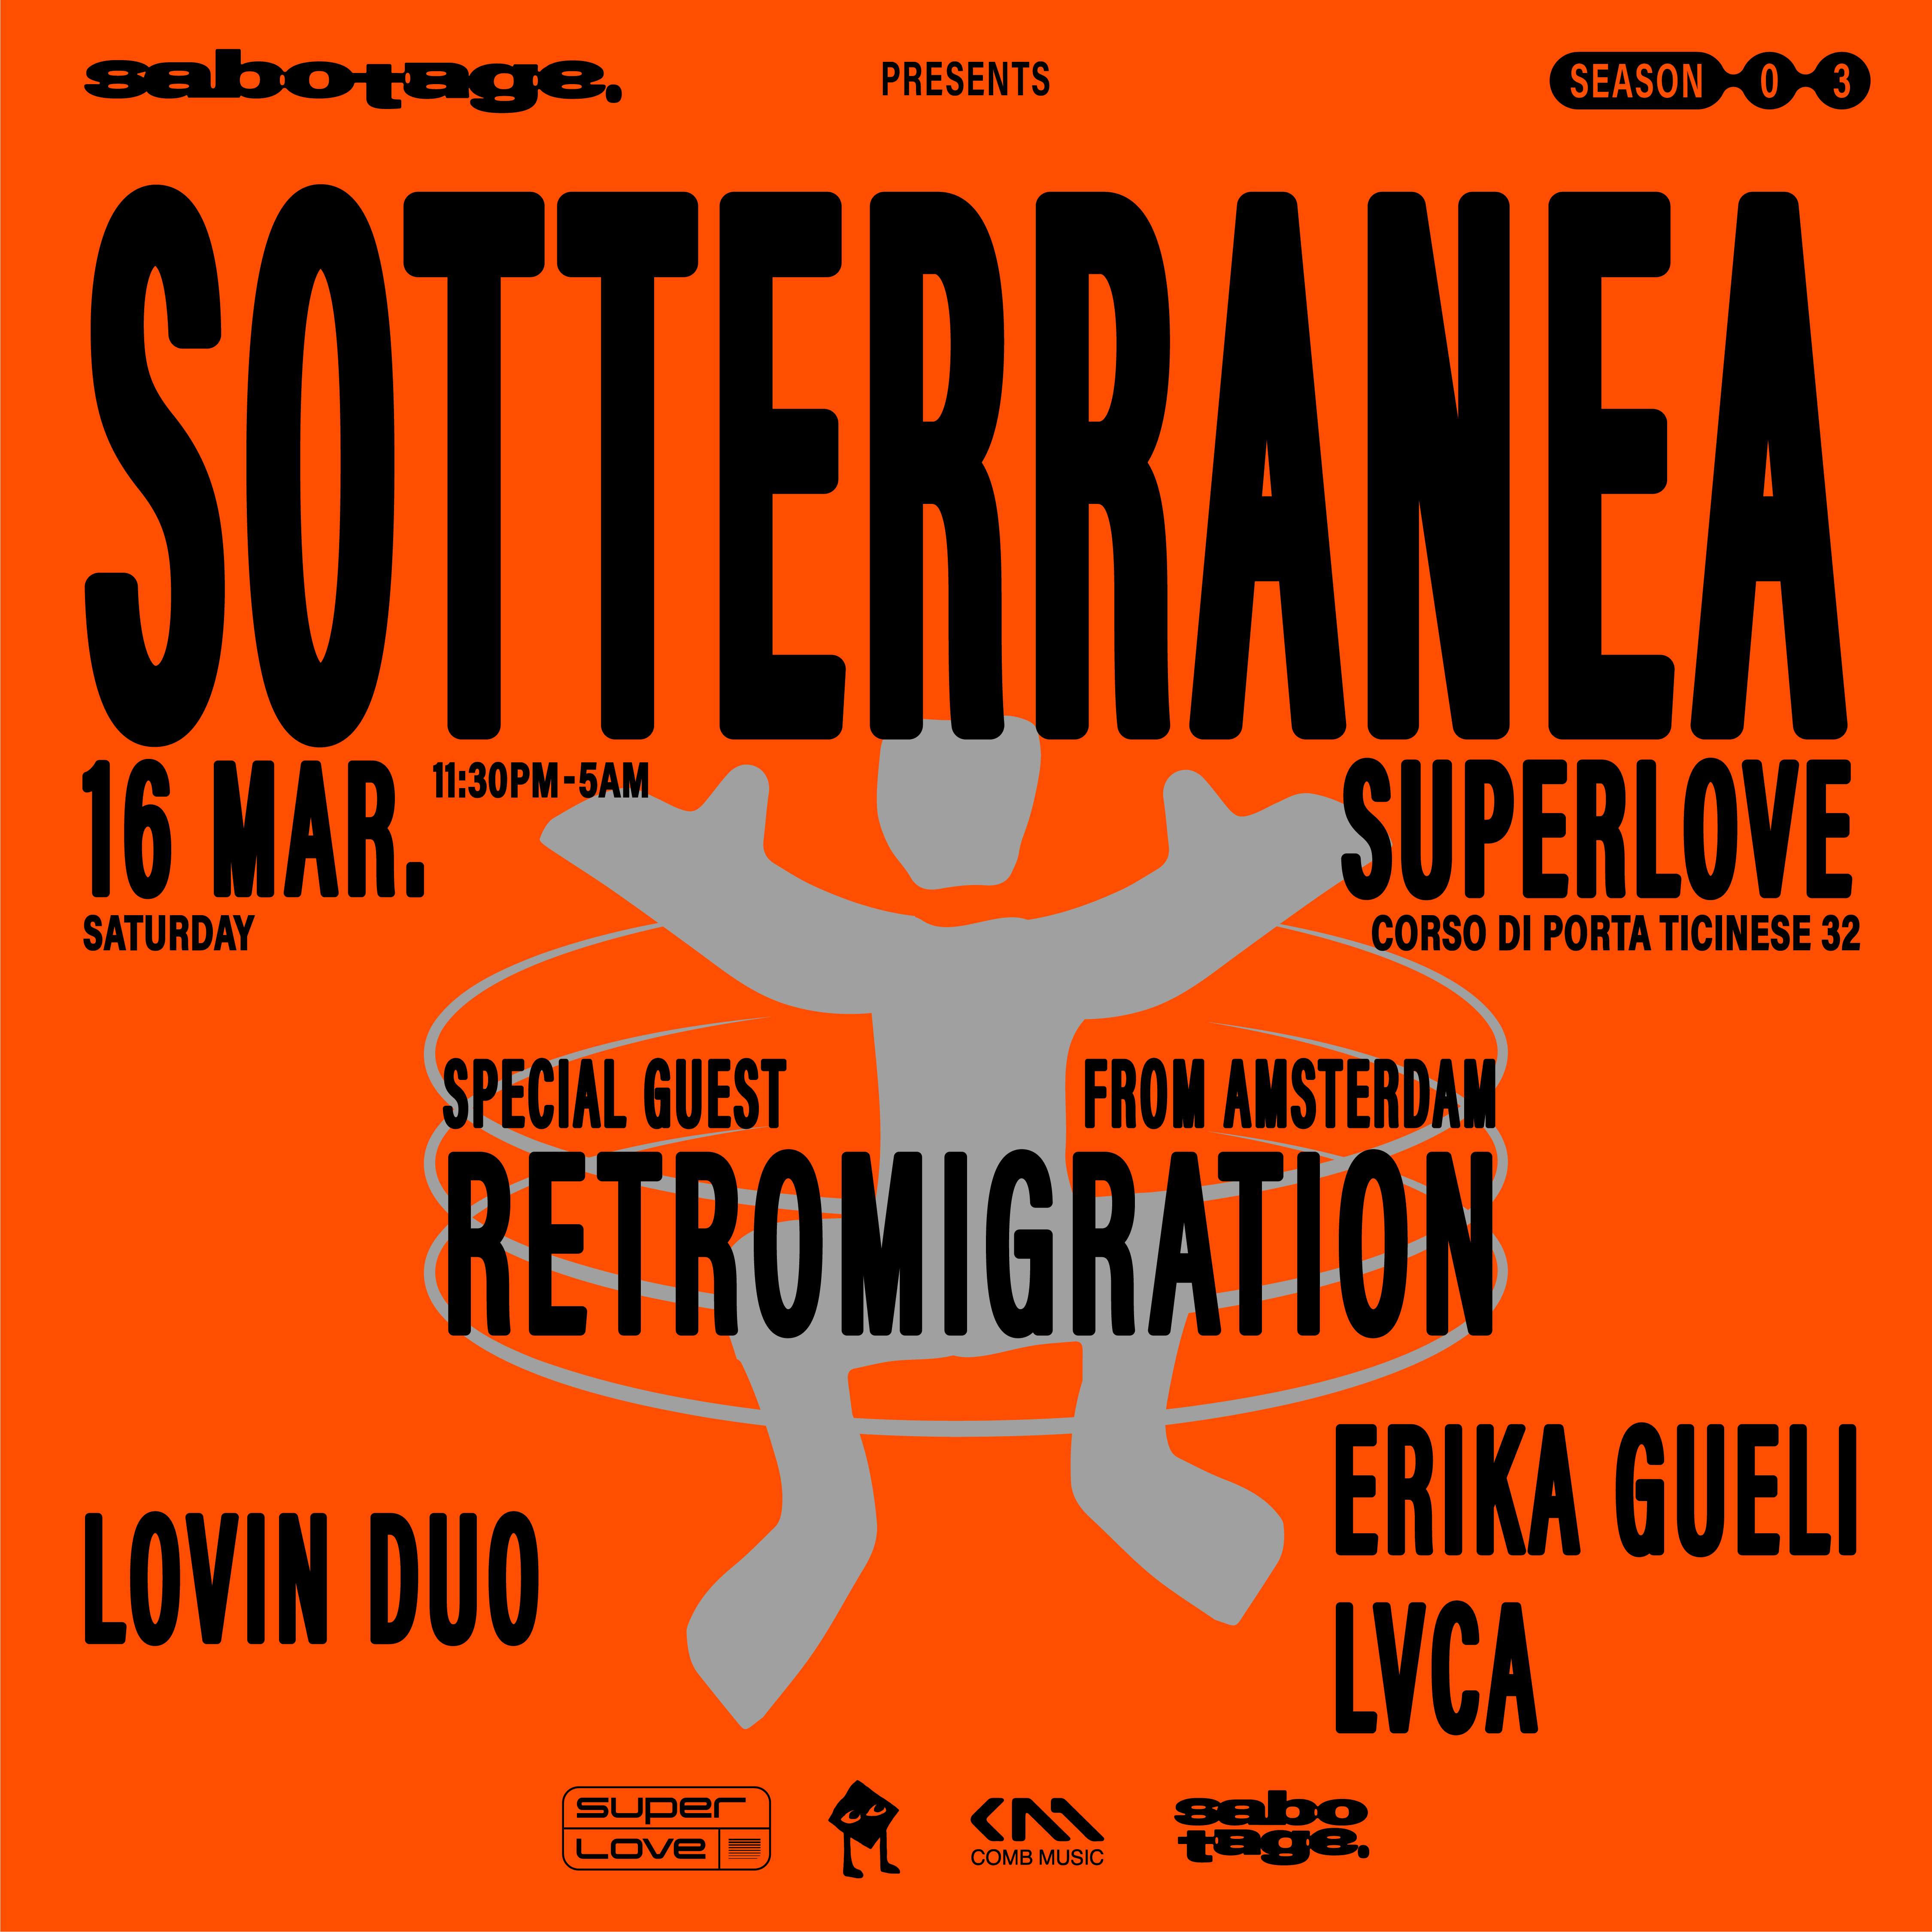 SOTTERRANEA special event with Retromigration - フライヤー表